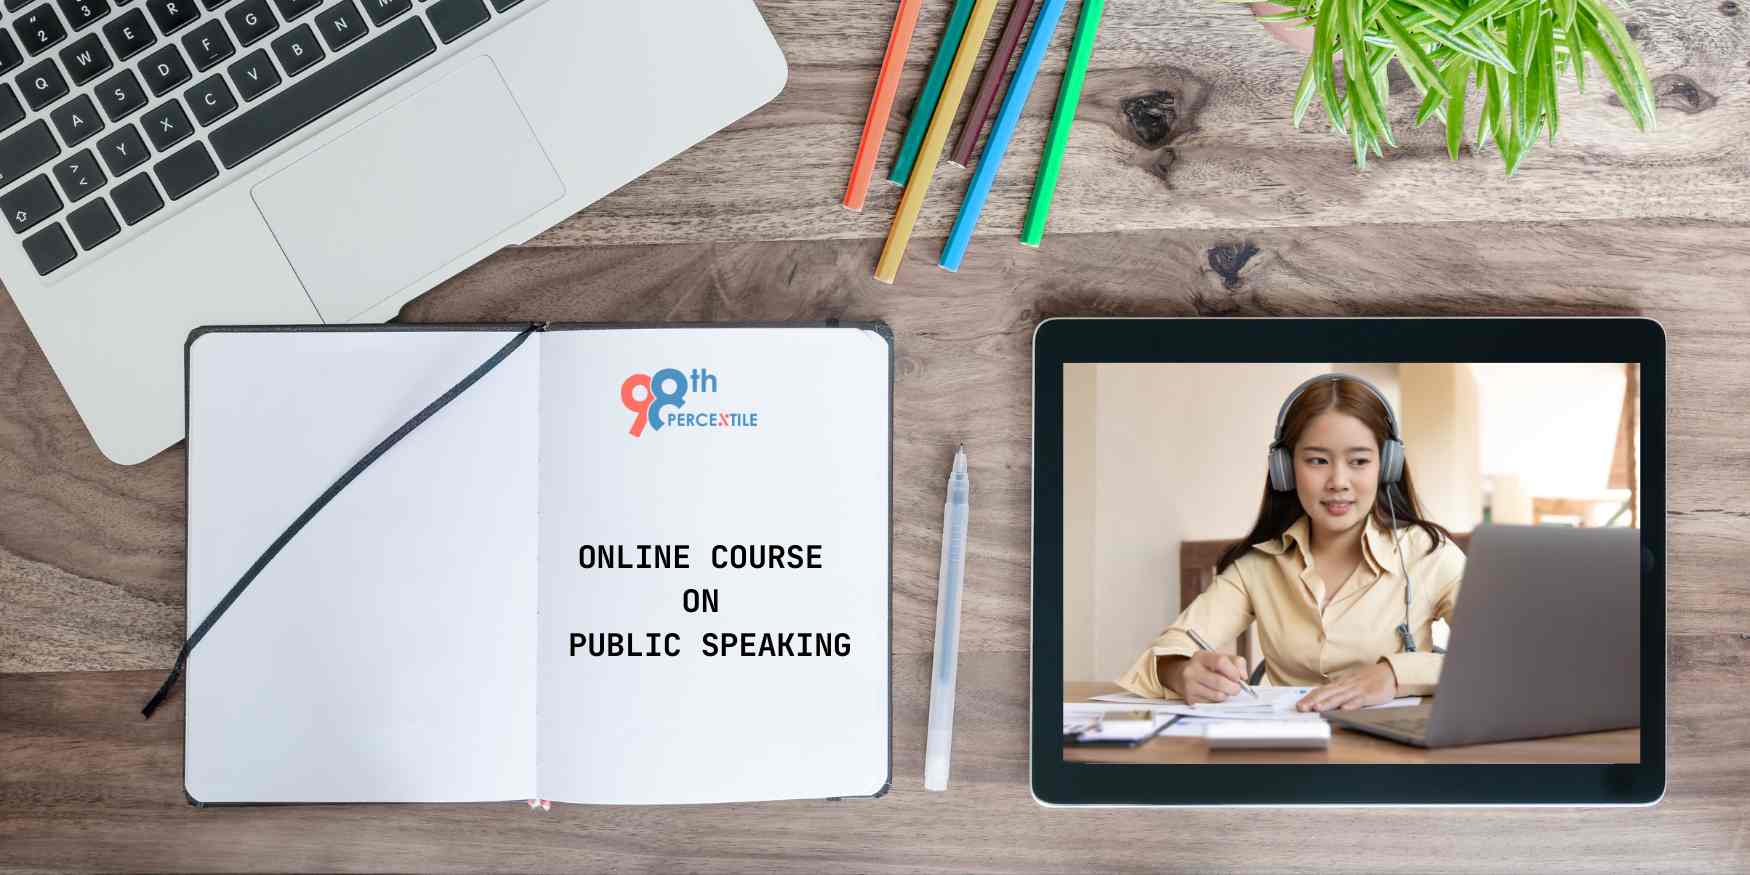 Where can i learn Public speaking